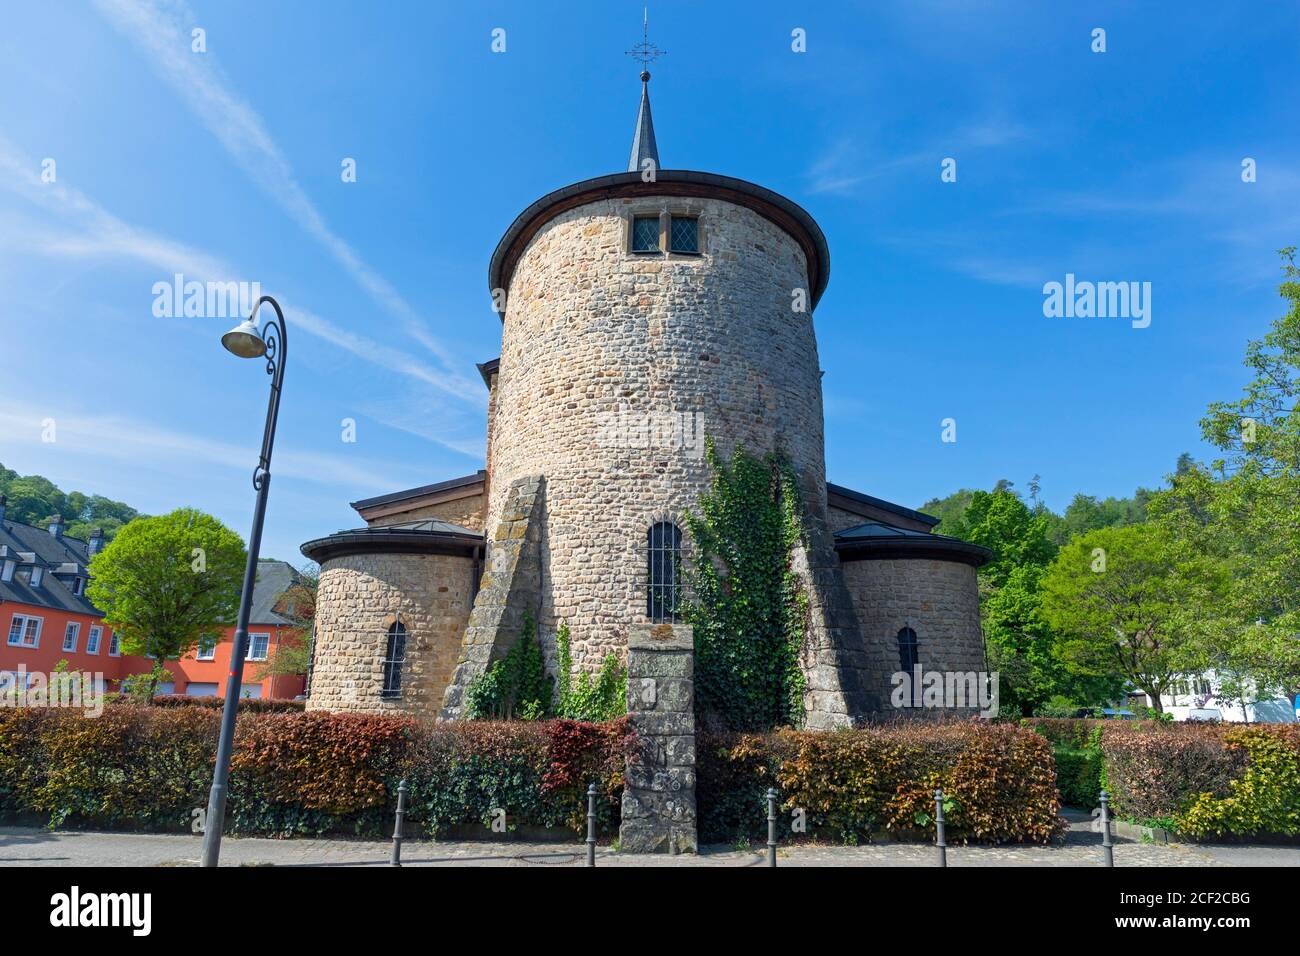 Europe, Luxembourg, Diekirch, Saeul, Église Assomption de la Bienheureuse Vierge Marie (Church of the Assumption of the Blessed Virgin Mary). Stock Photo